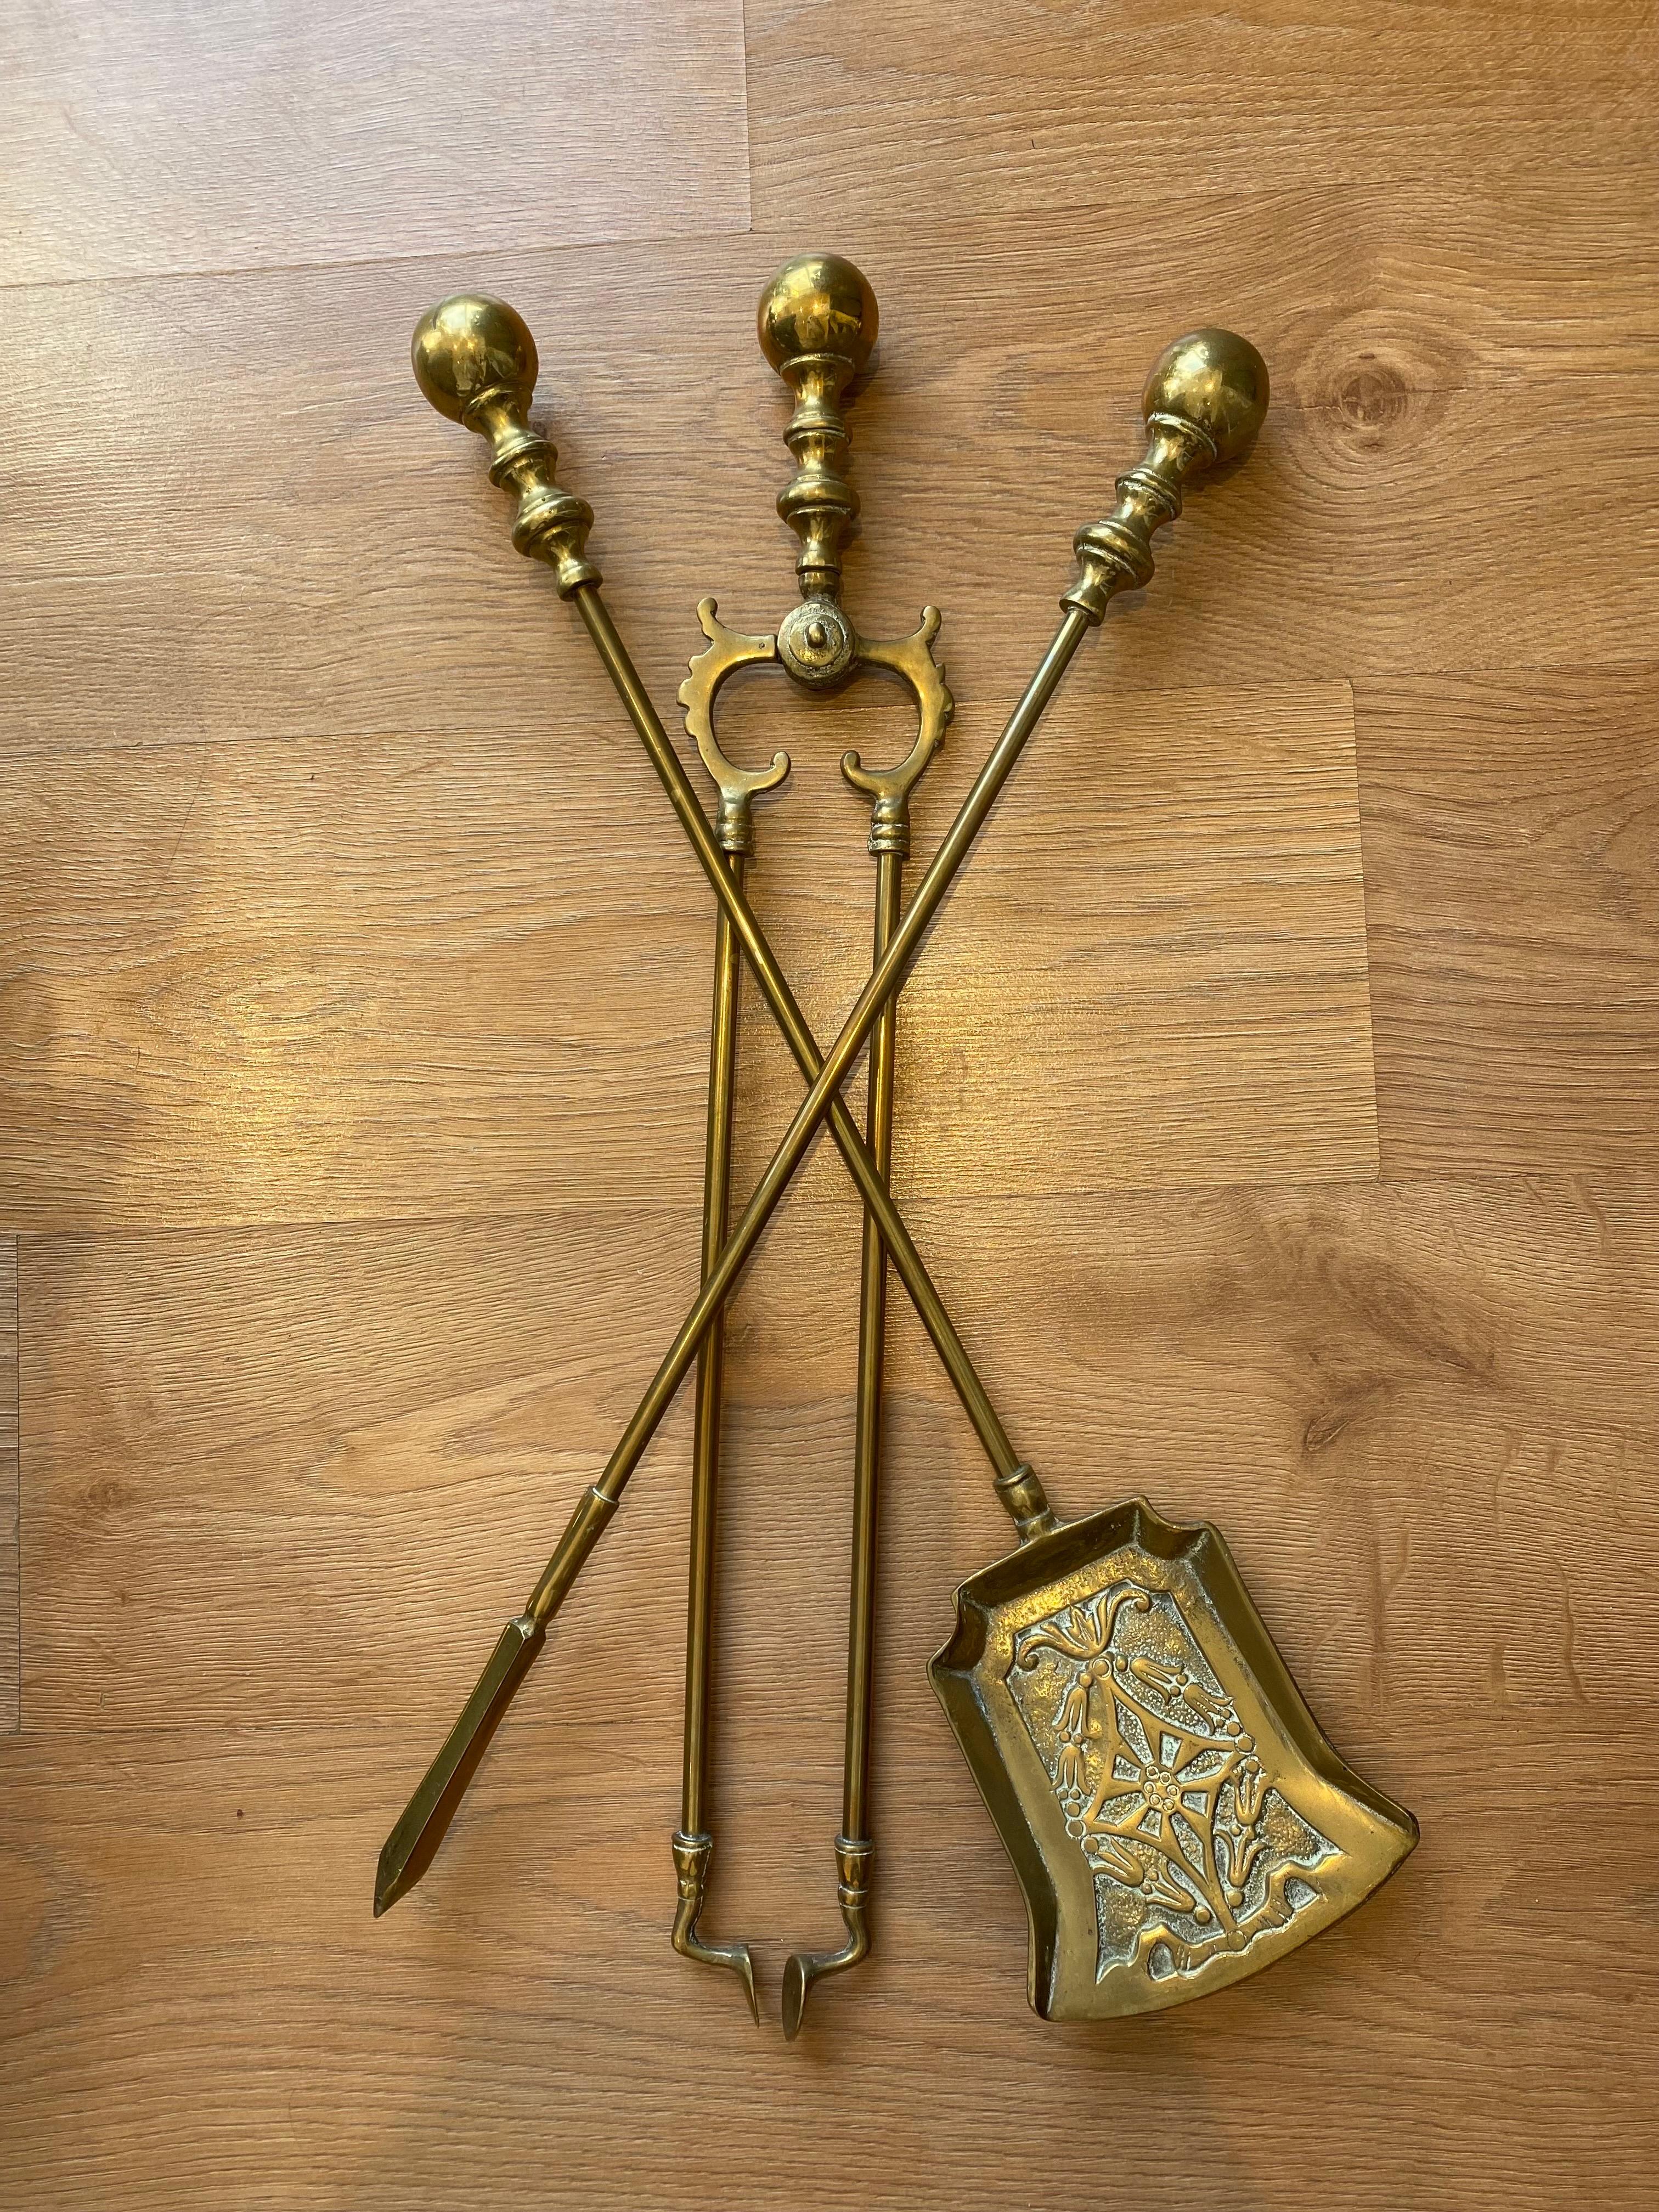 A stunning antique Victorian brass fire companion set. The superb set is solid brass, with beautiful ball motif. with matching the elegant yet powerful impression the set provides. This is truly a remarkable set, with fantastic craftsmanship. A